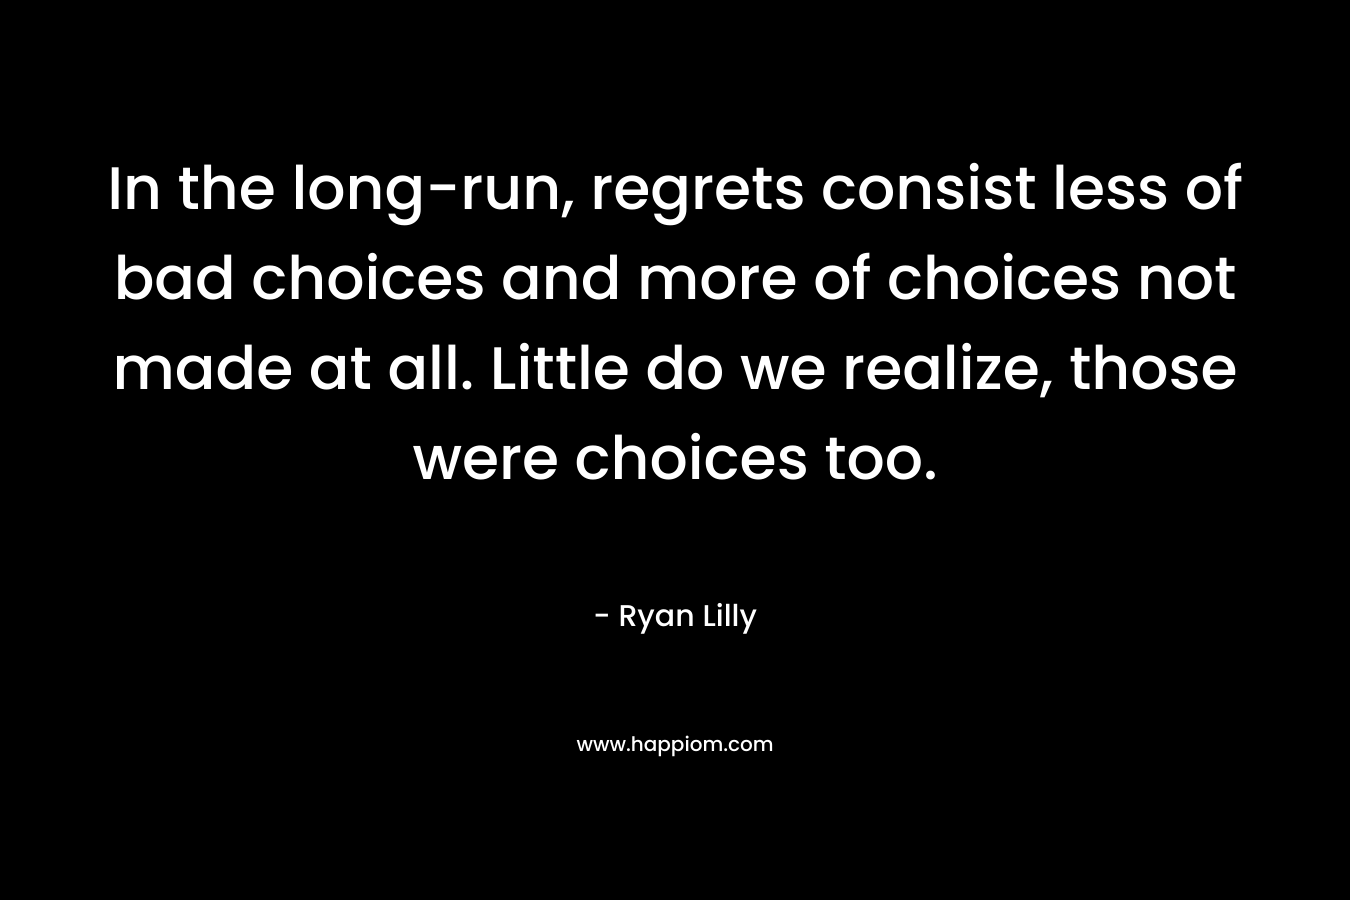 In the long-run, regrets consist less of bad choices and more of choices not made at all. Little do we realize, those were choices too.